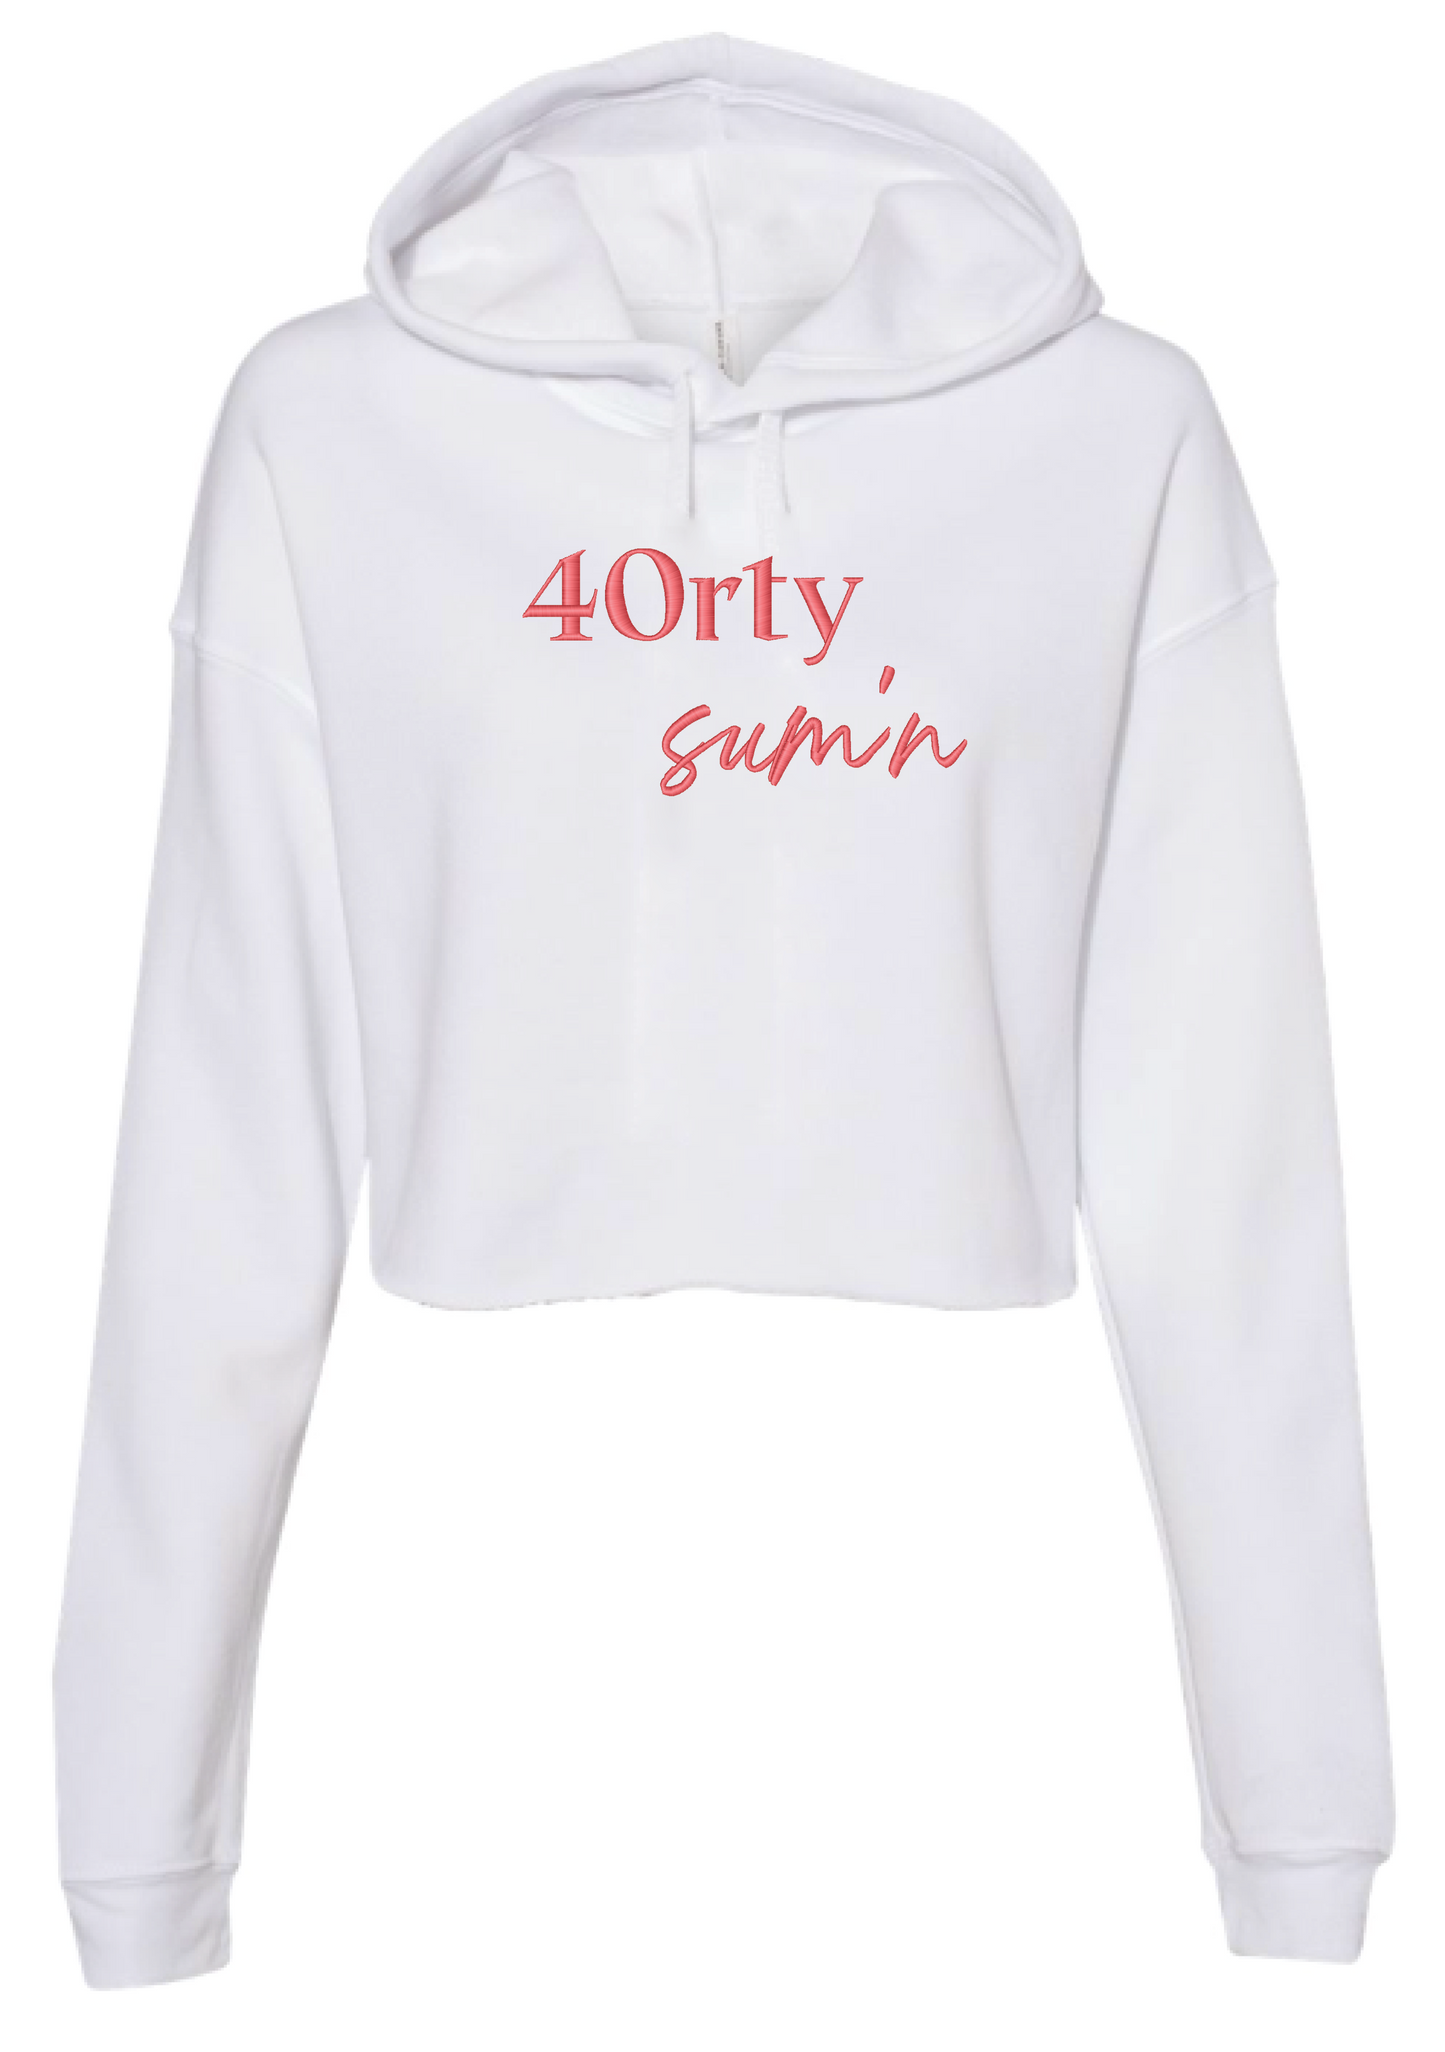 40rty sum'n Embroidered Cropped Fleece Hoodie